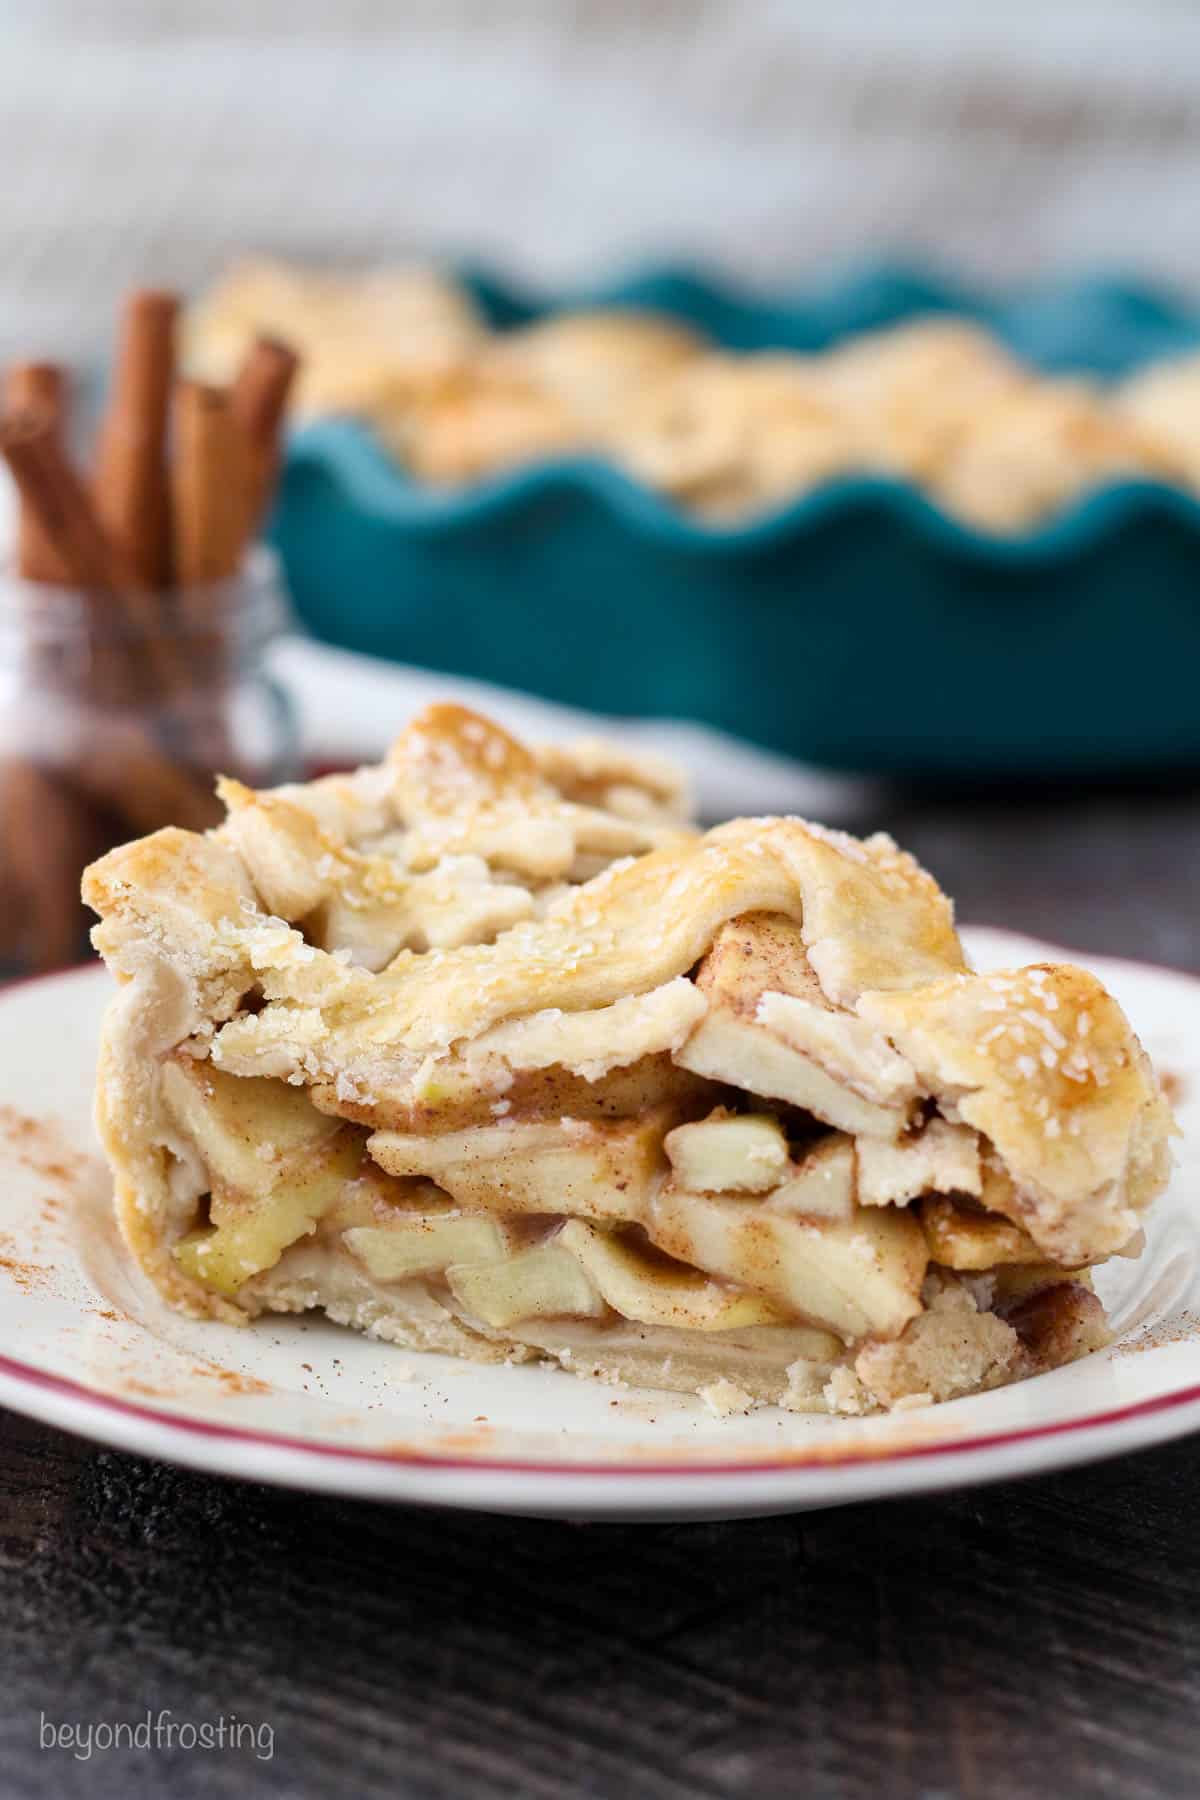 A side view of a slice of apple pie showing the lattice crust and the apple pie filling